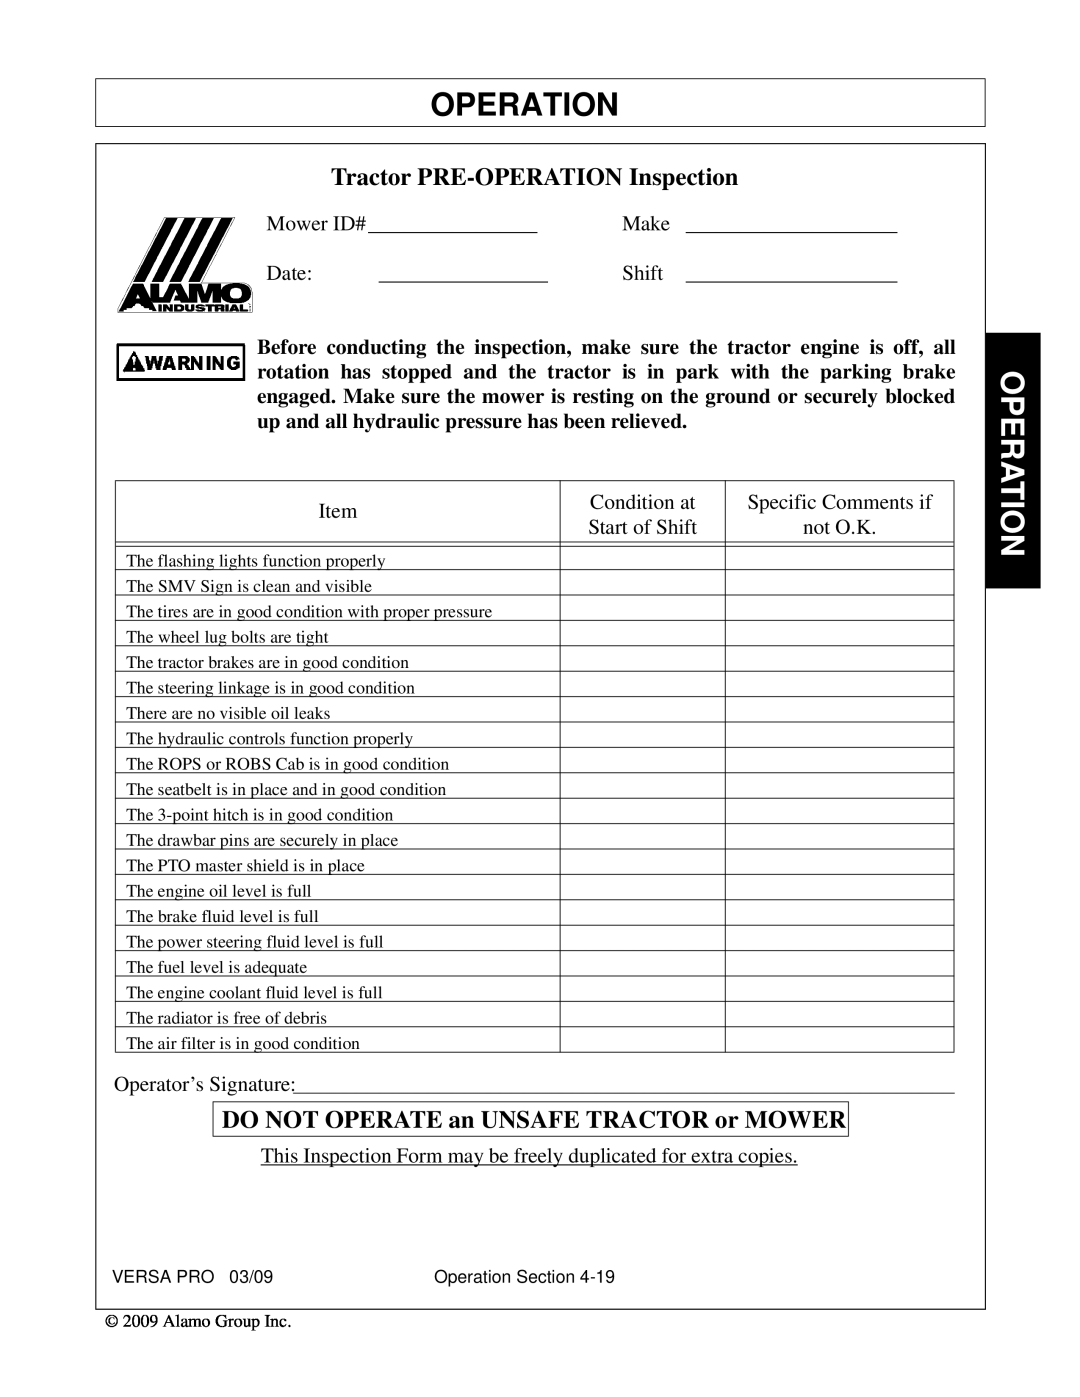 Alamo 803350C manual Tractor PRE-OPERATIONInspection, Operation, DO NOT OPERATE an UNSAFE TRACTOR or MOWER 